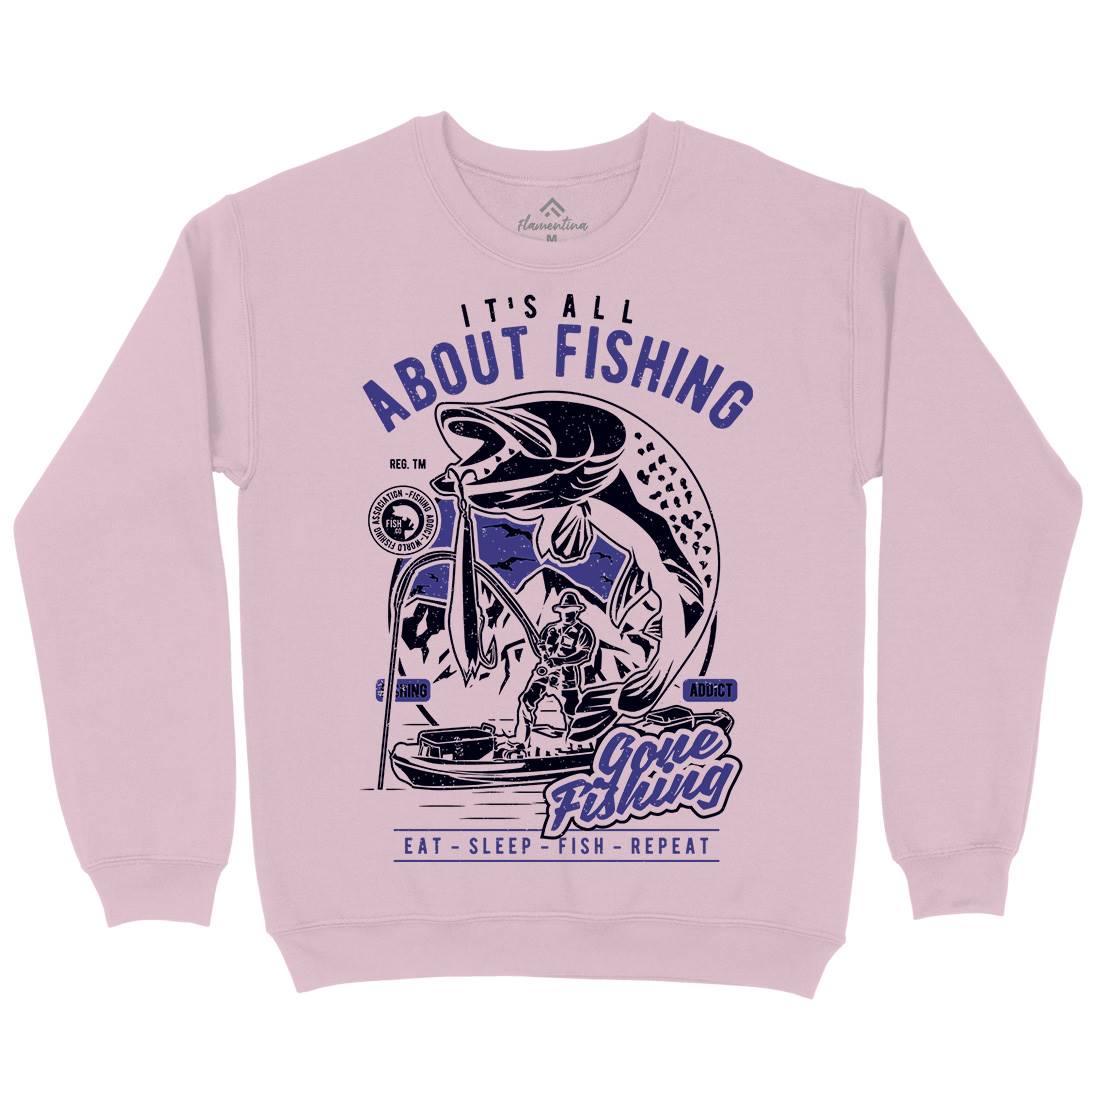 All About Kids Crew Neck Sweatshirt Fishing A604